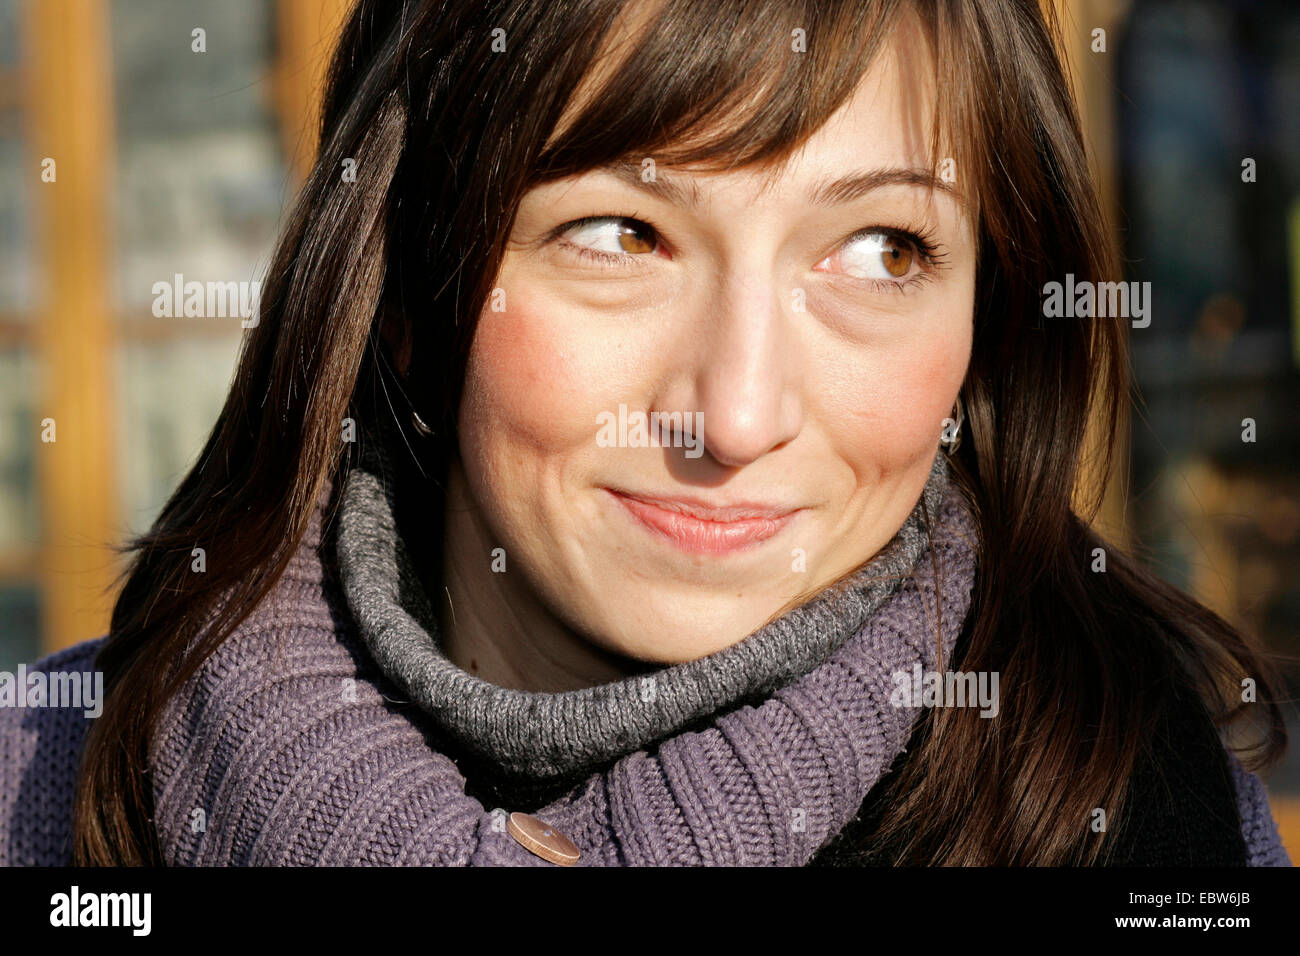 impish sideglance of abrown-haired woman, portrait, Germany Stock Photo